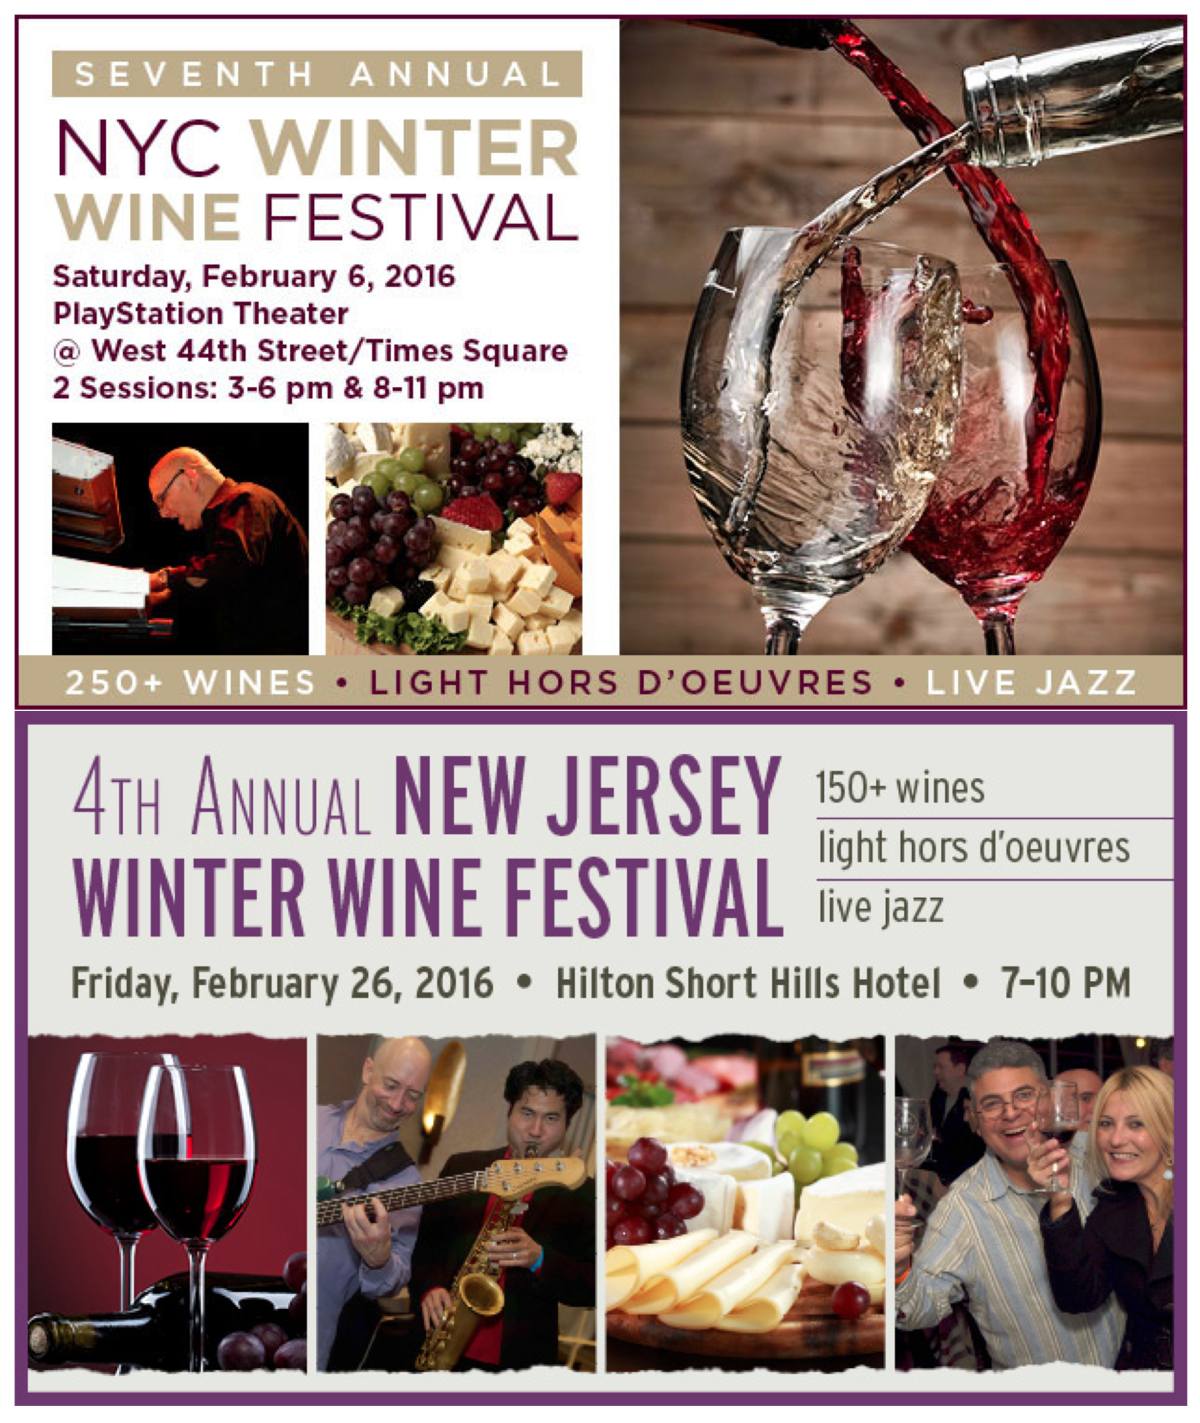 New York Wine Events to Present Annual Winter Wine Festivals in Times